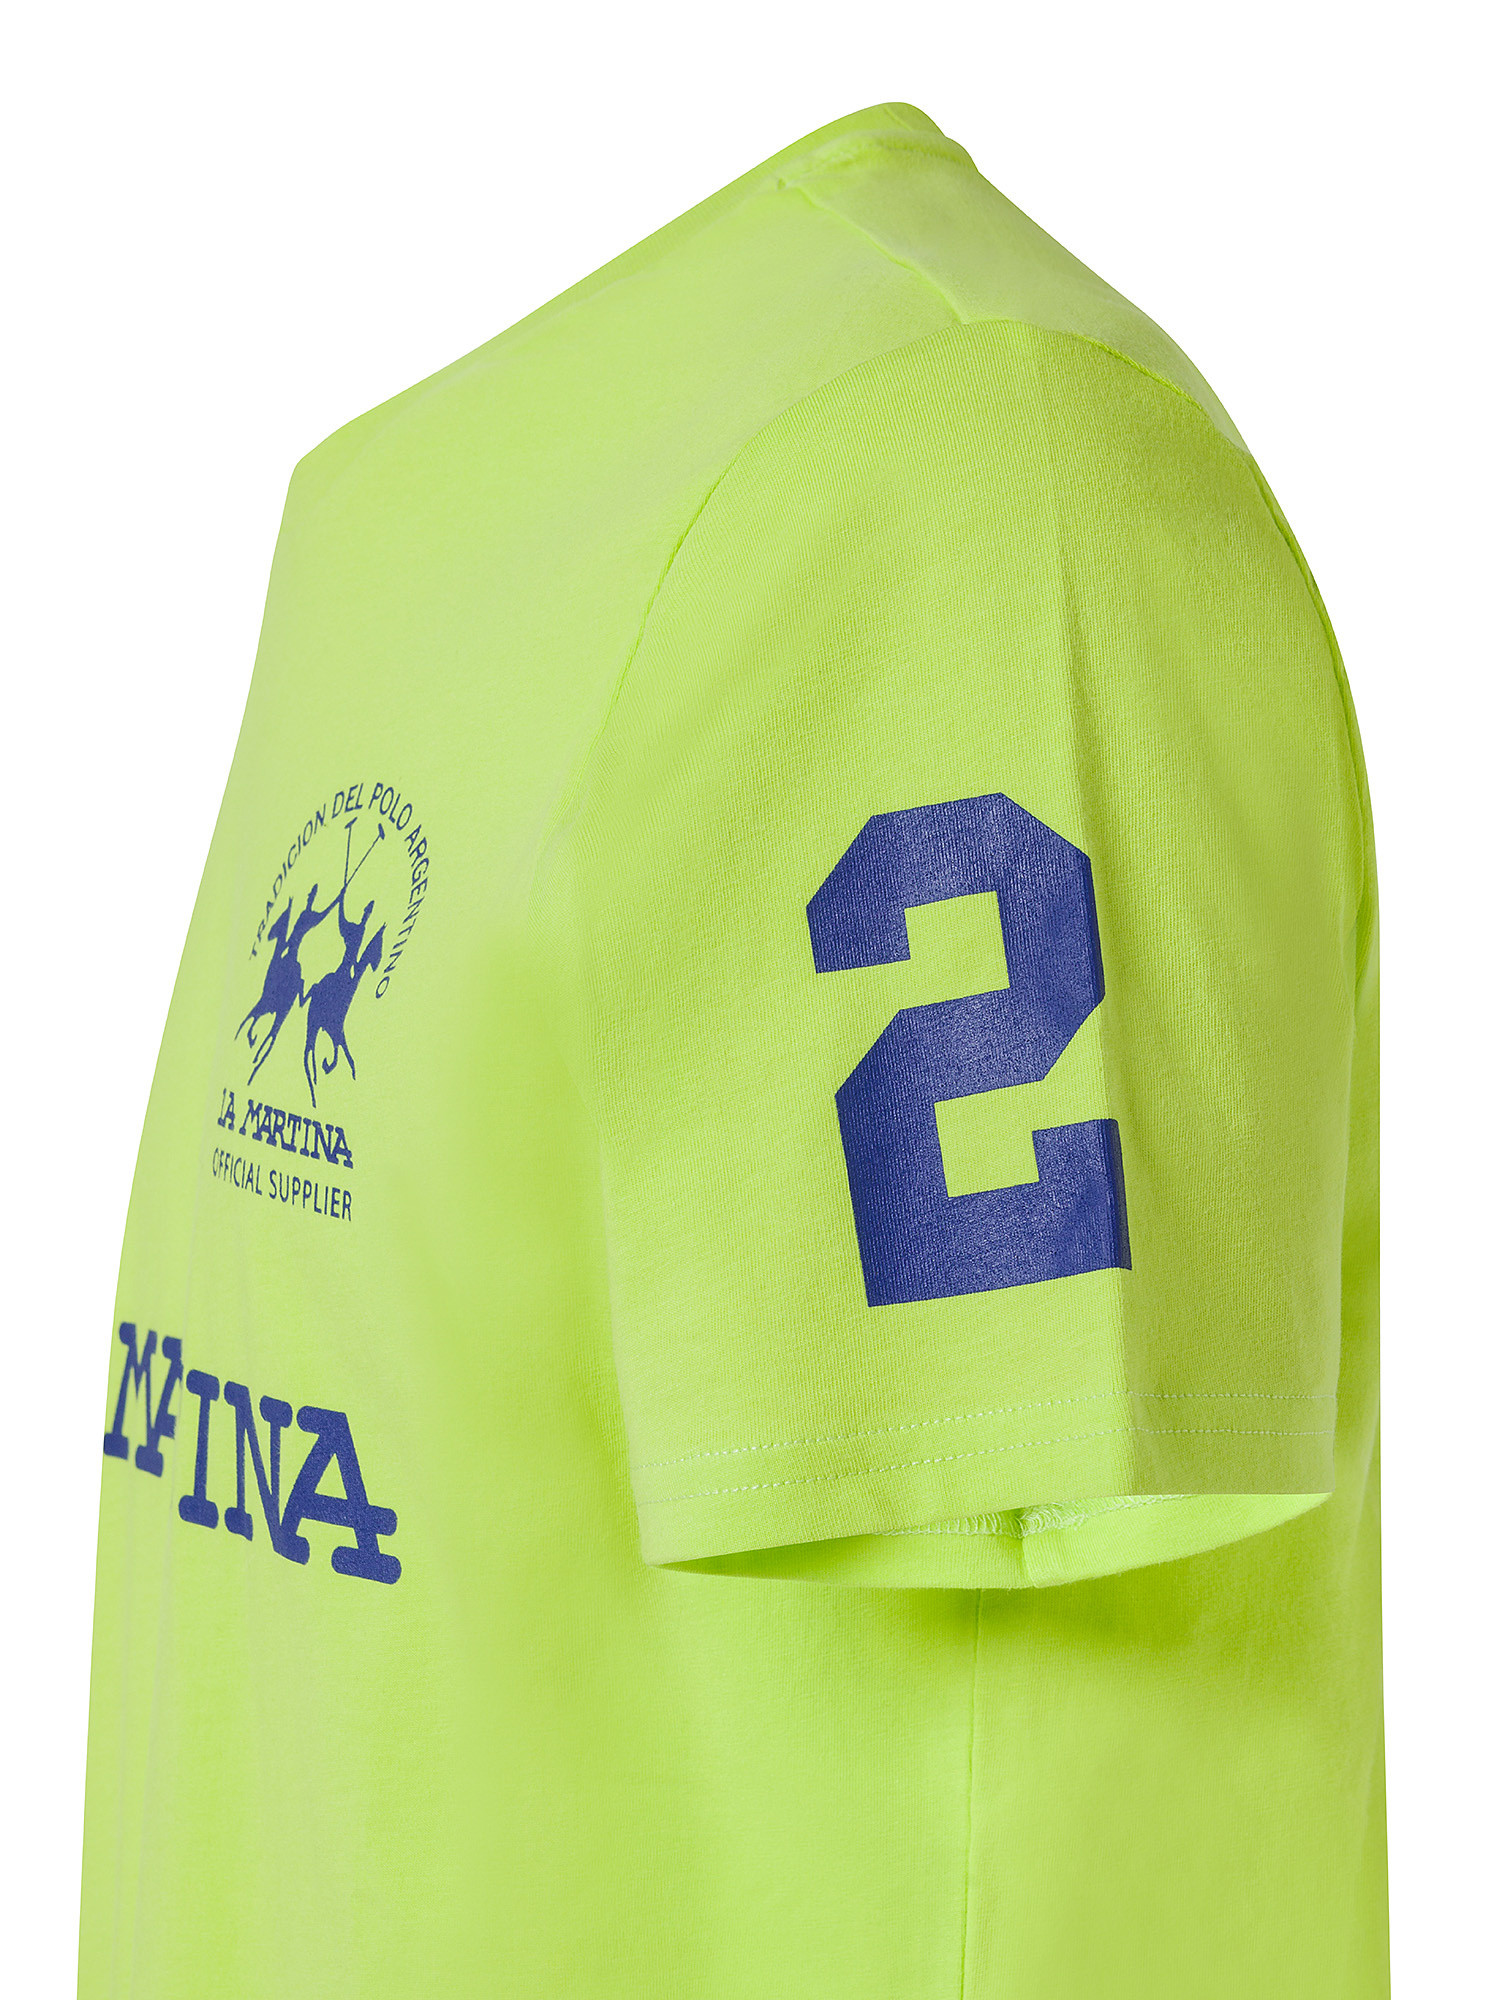 La Martina - T-shirt maniche corte in cotone jersey, Yellow, large image number 2